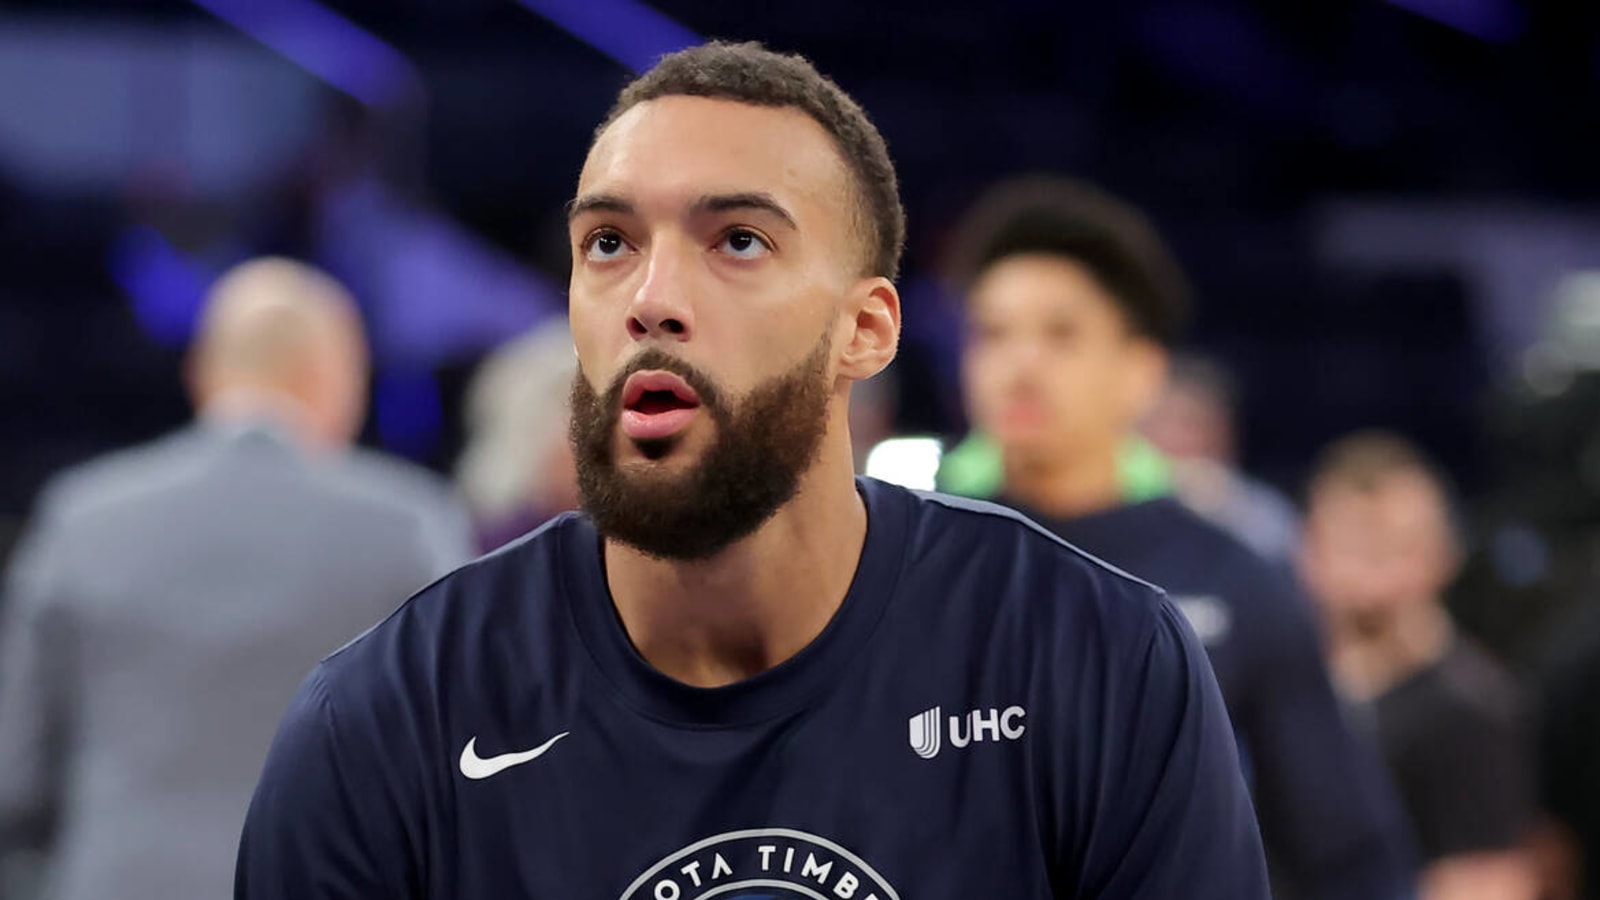 Rudy Gobert's punch changed the course of the NBA